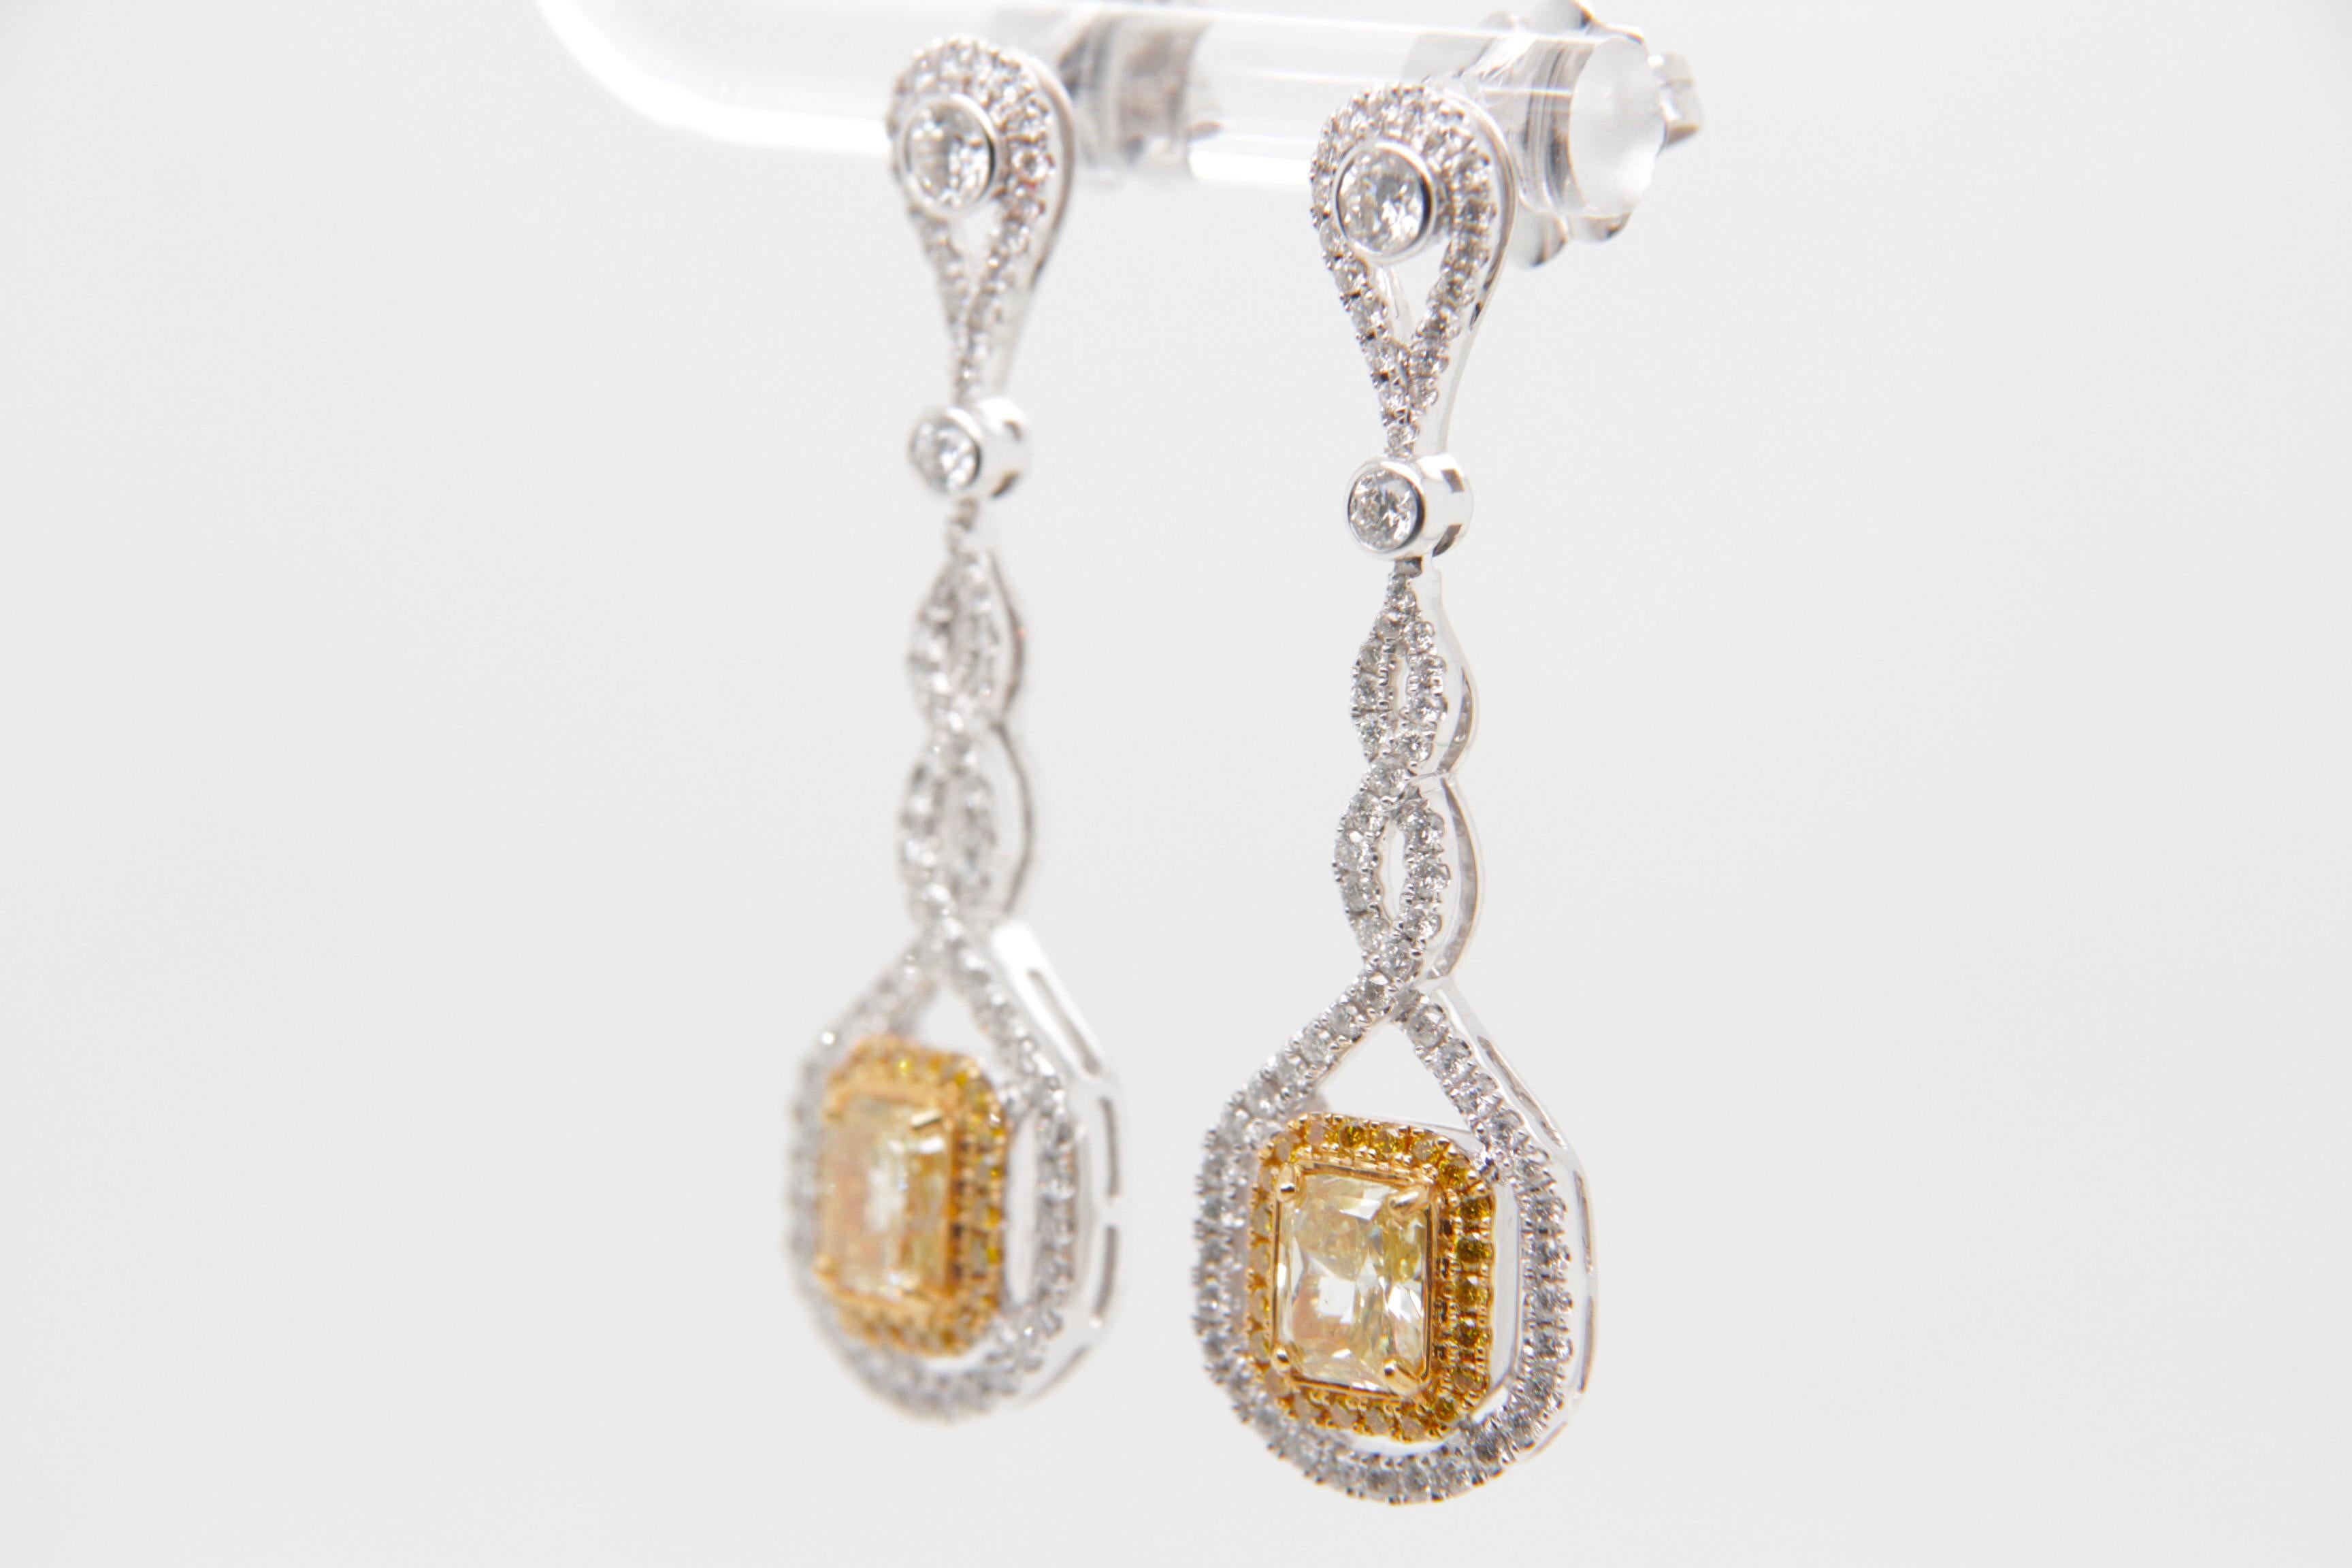 Introducing a magnificent creation from Rewa Jewelry, these diamond earrings are a testament to the brand's commitment to exquisite craftsmanship and timeless beauty.

At the heart of these earrings are two radiant diamonds, totaling 1.53 carats.